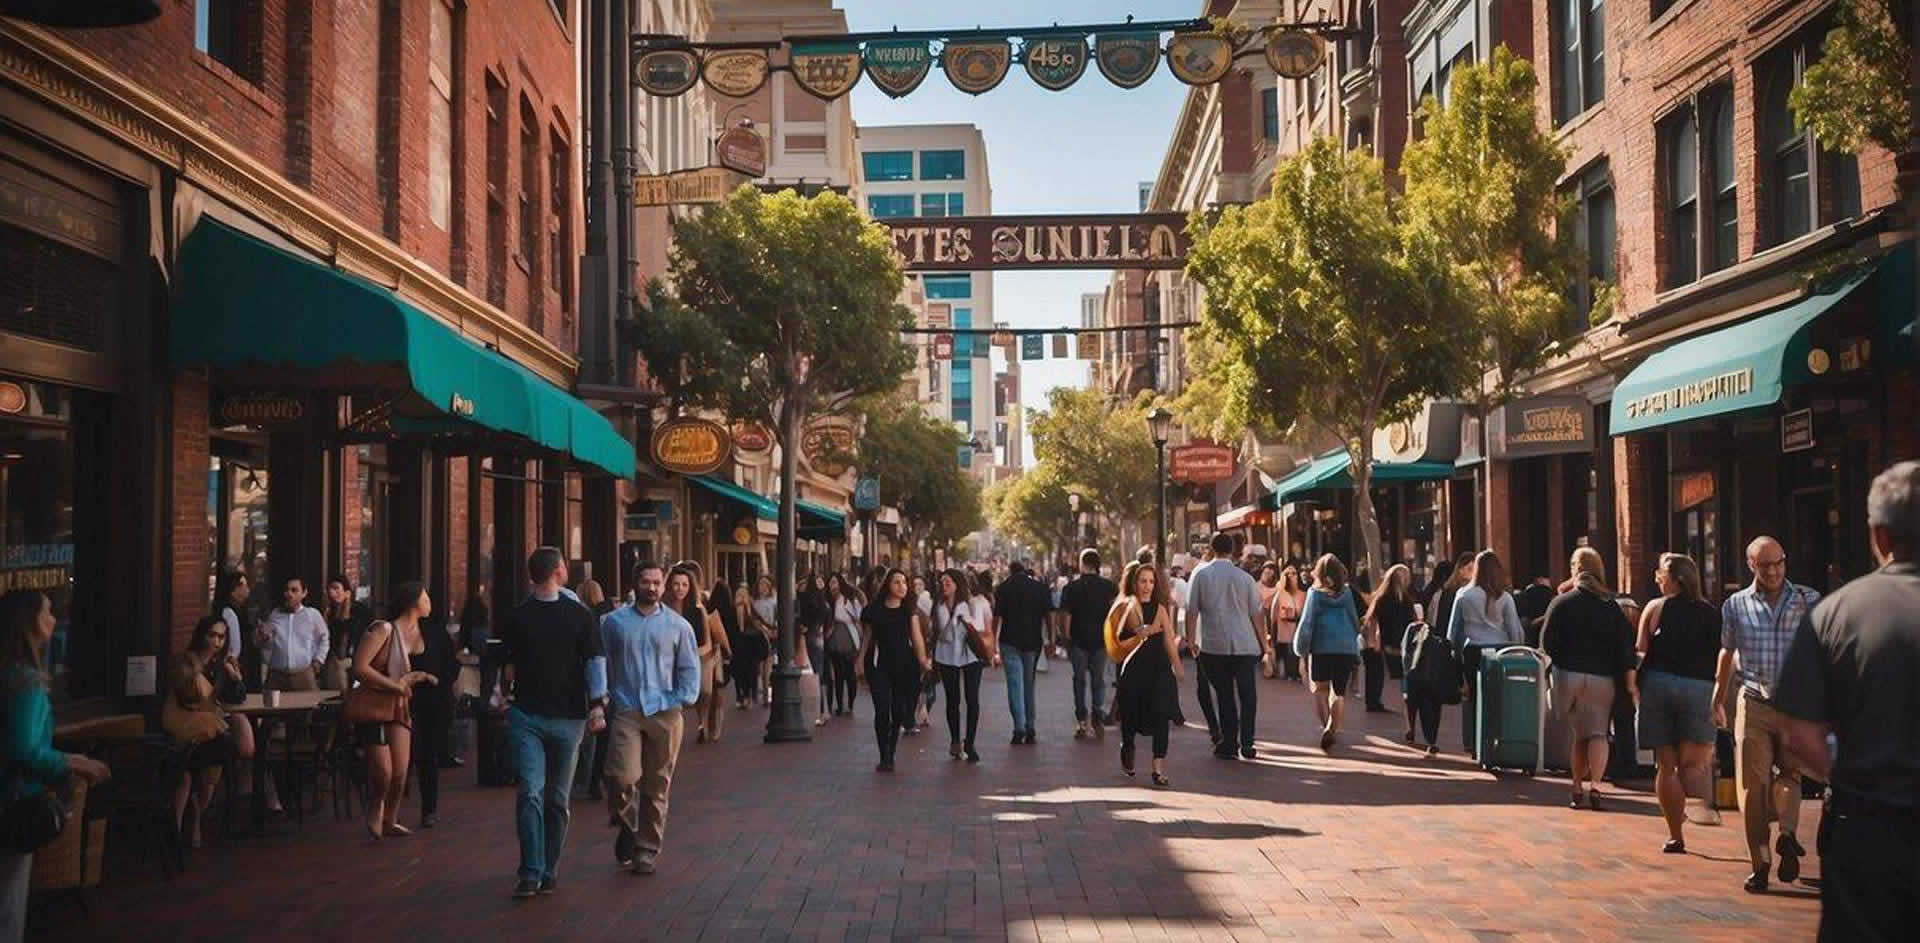 The Gaslamp Quarter bustles with activity, featuring historic buildings, lively nightlife, and a vibrant atmosphere. The scene includes bustling streets, colorful signage, and a mix of old and new architecture